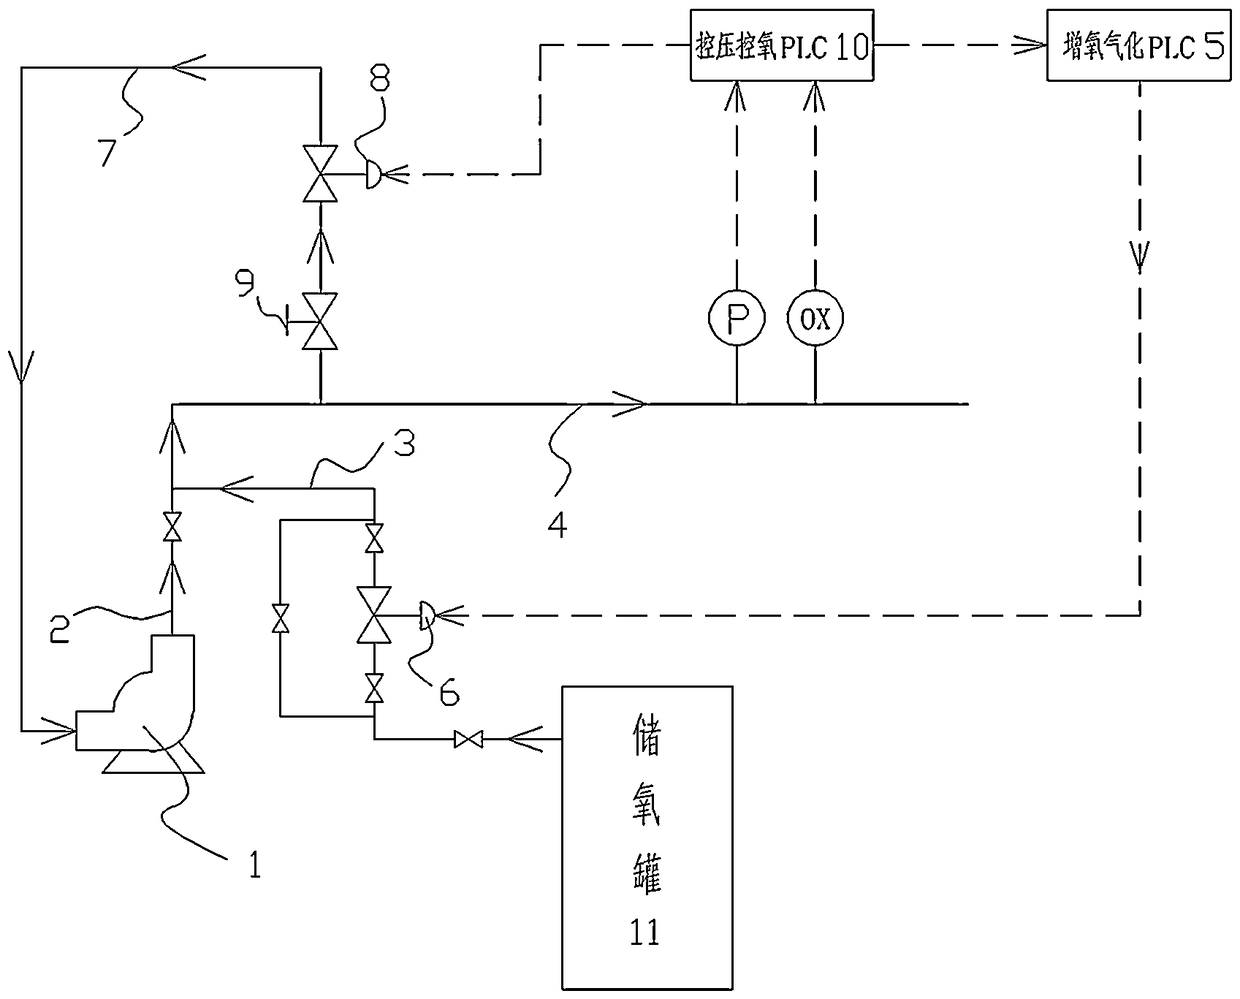 Pressure and oxygen control system for fixed bed aeration gasification process